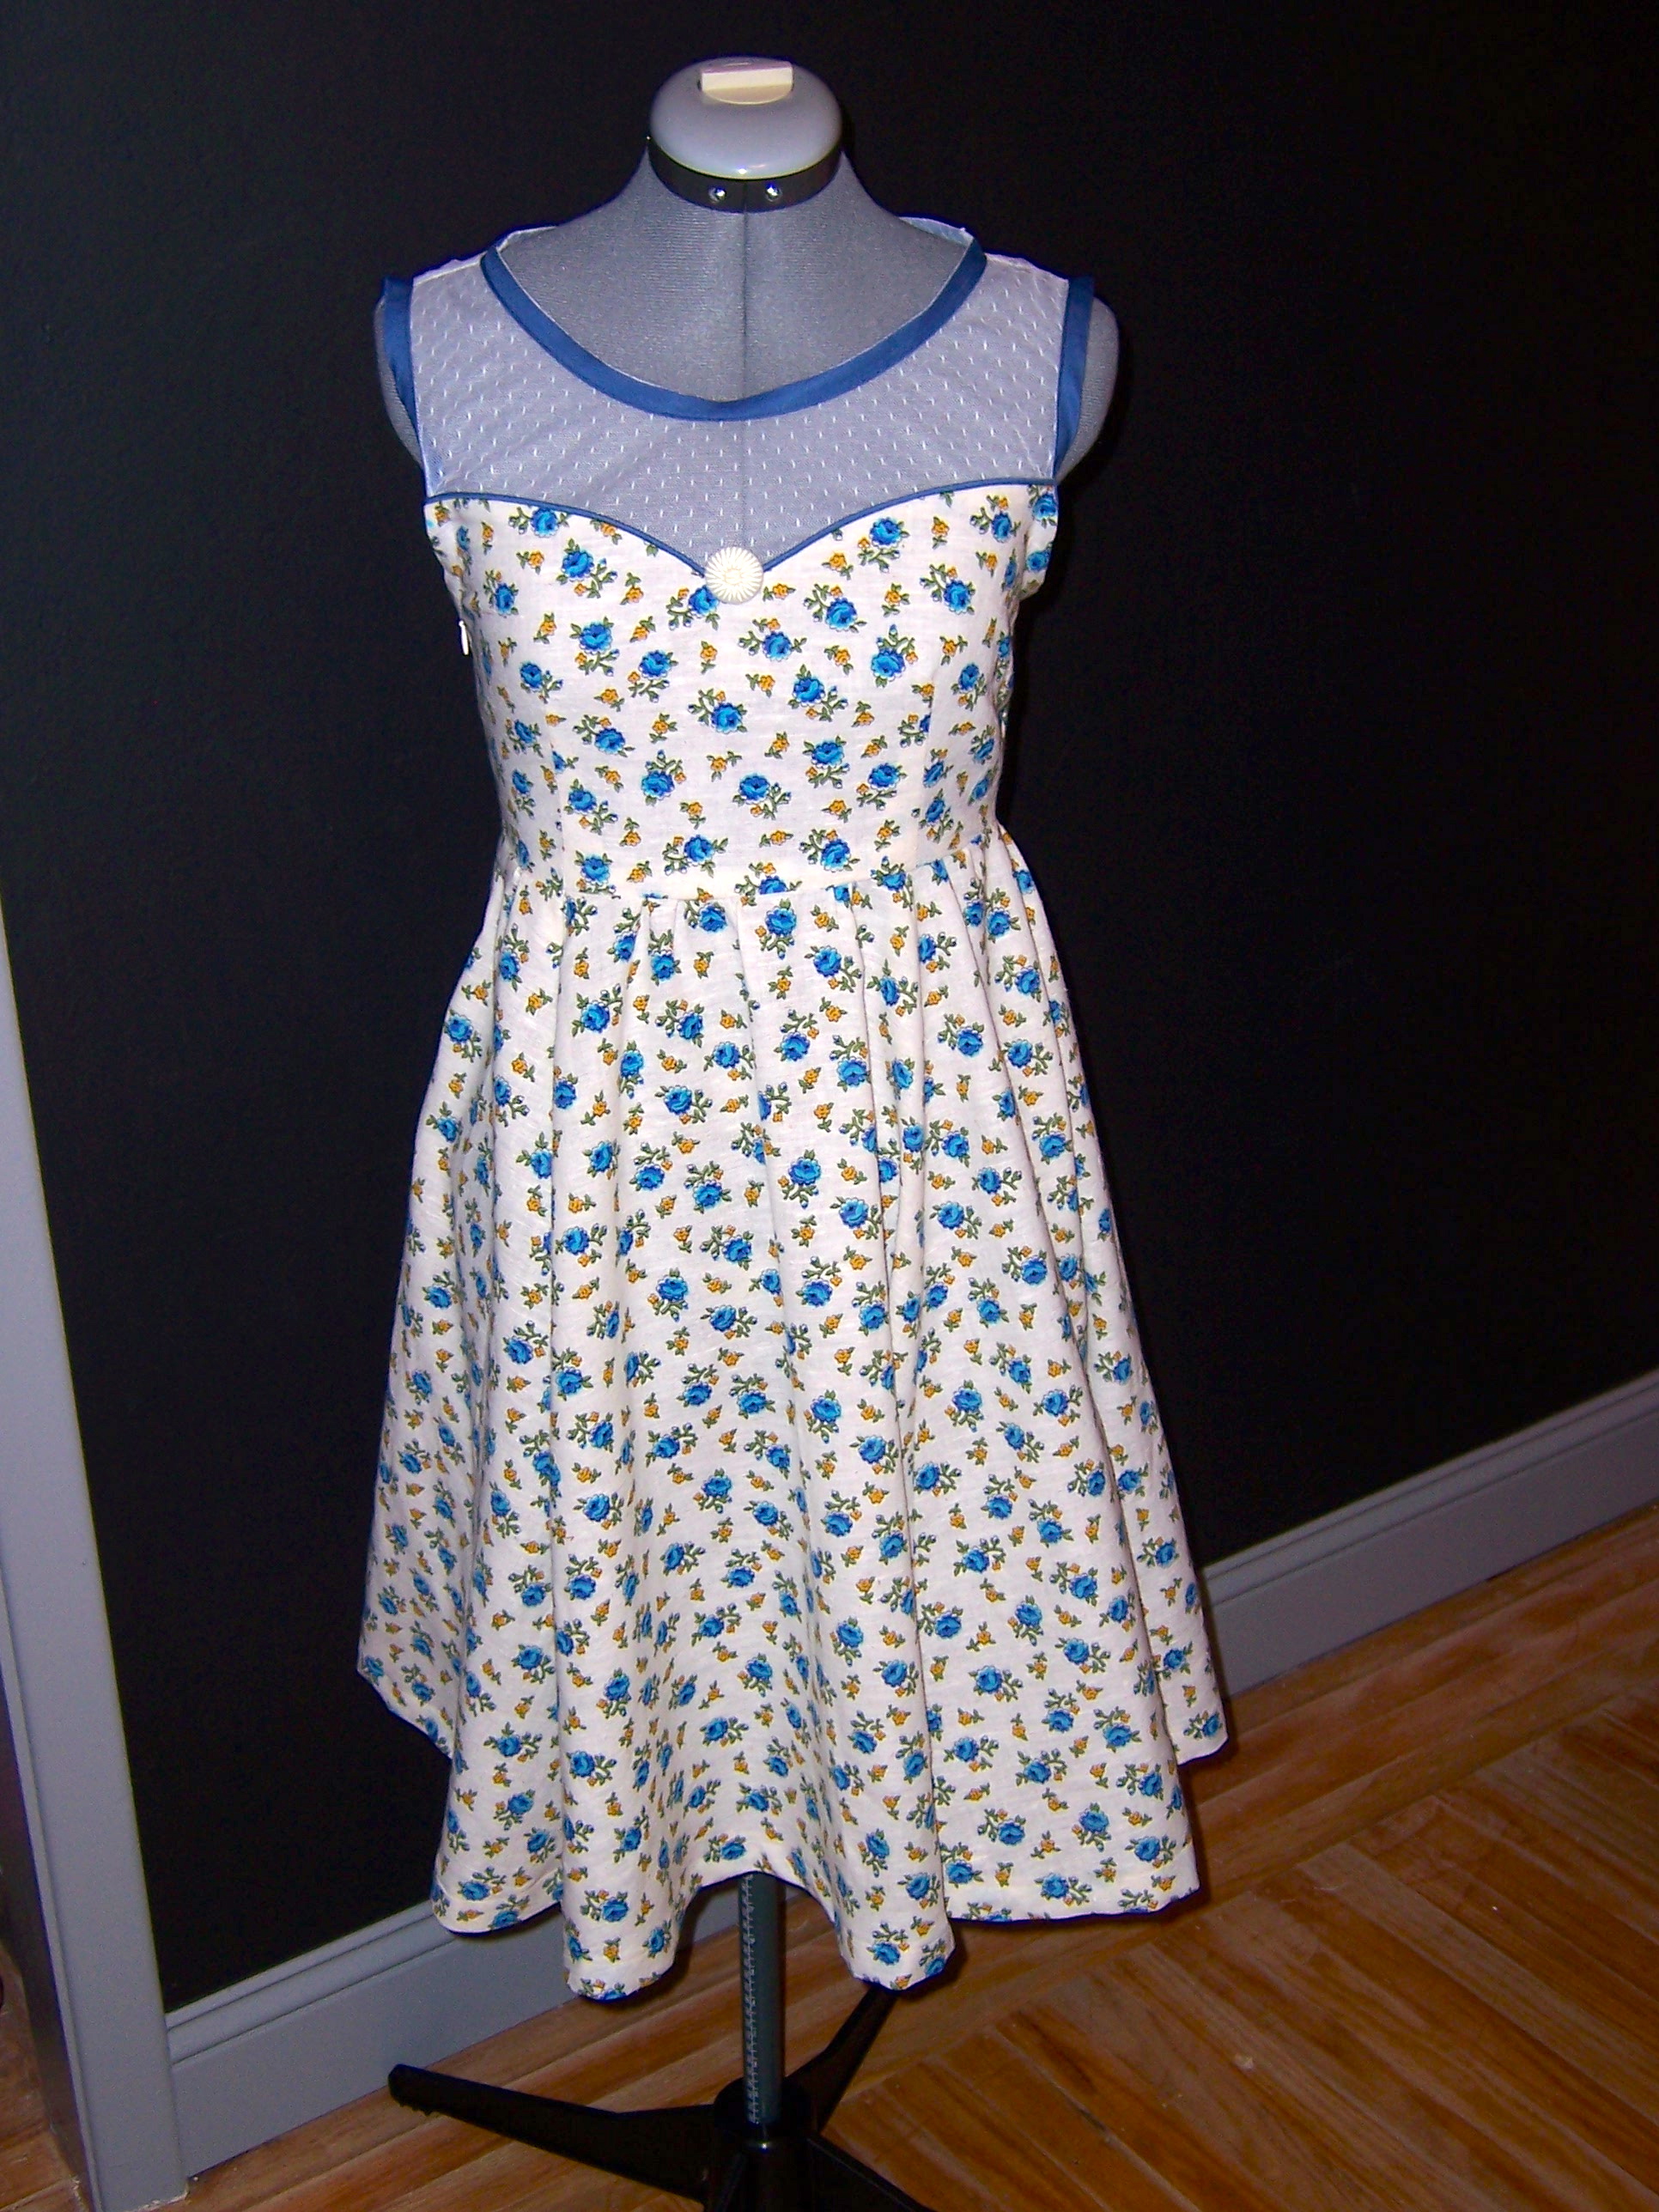 ava dress take 2 – Sewing Projects | BurdaStyle.com